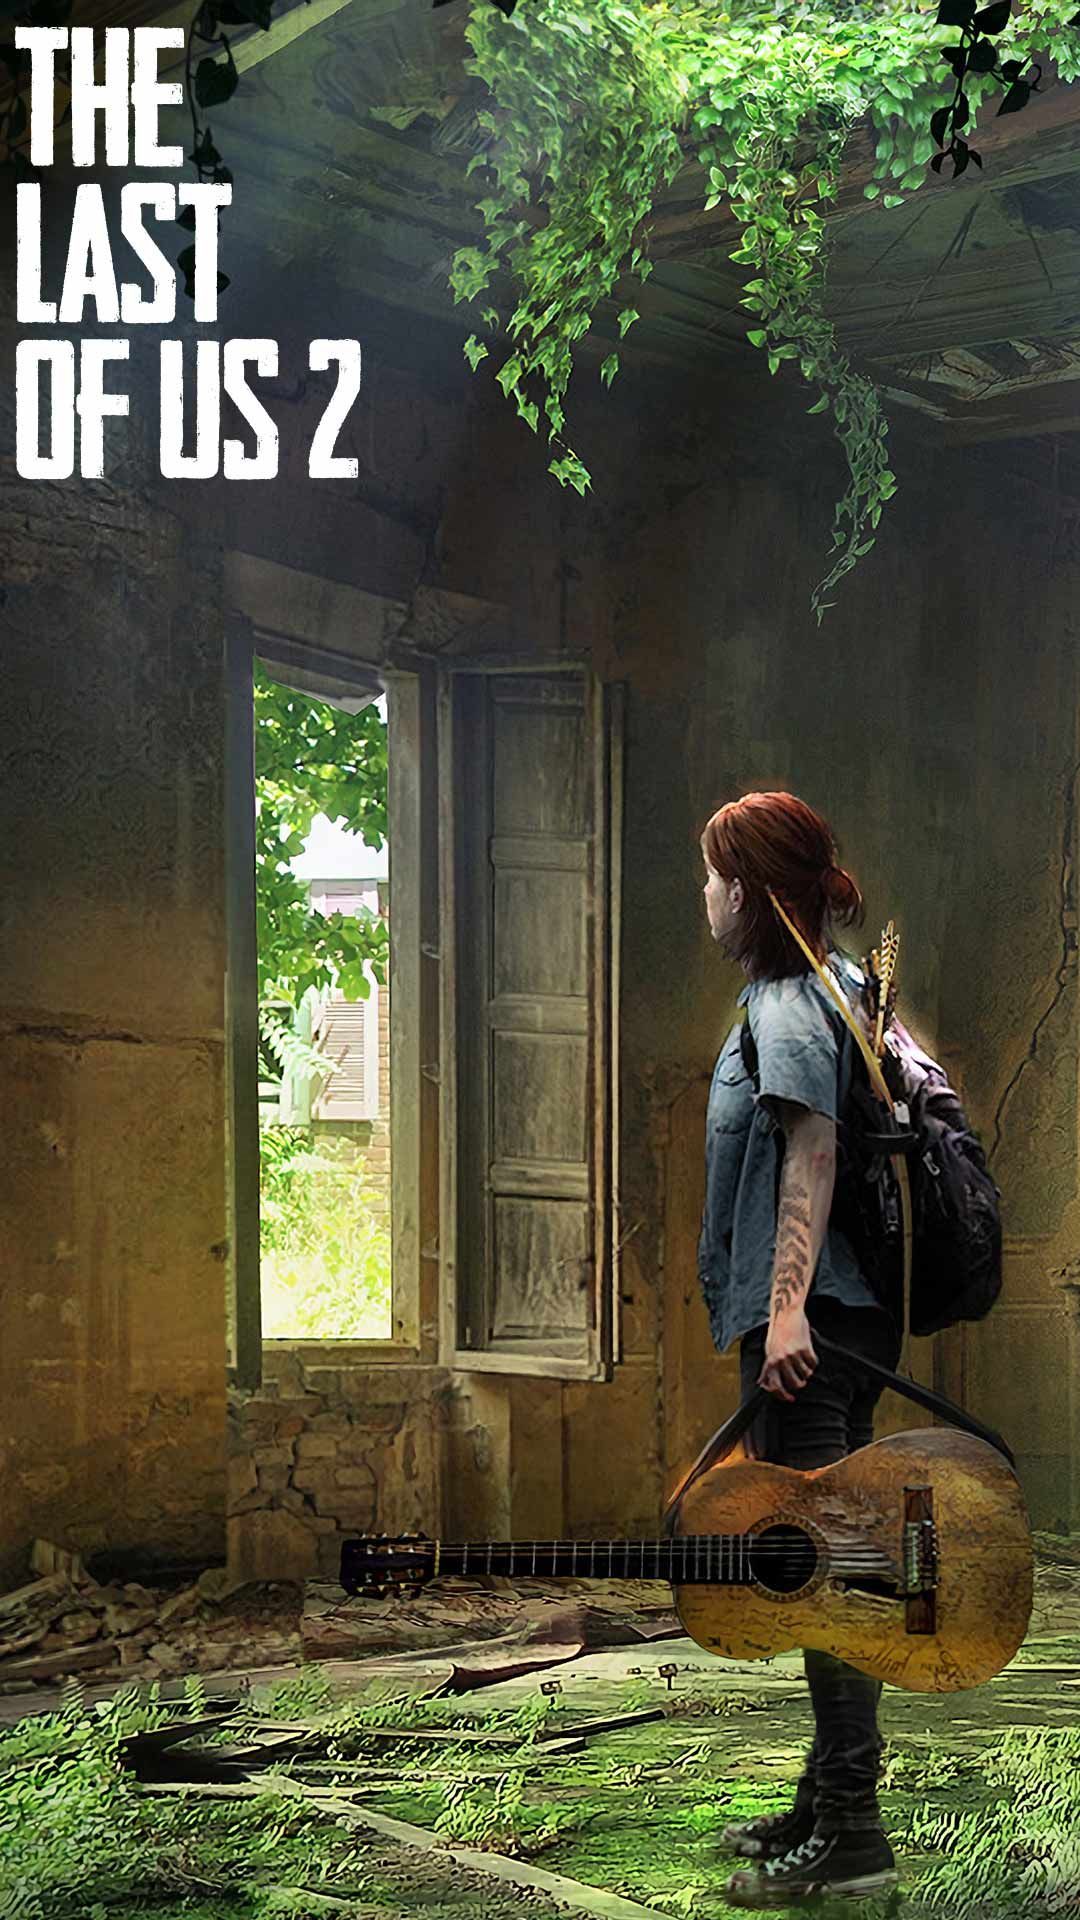 The last of us part 2 wallpaper HD phone background PS4 game art Poster on iPhone android. The last of us, Last of us part 2 wallpaper, Ellie the last of us